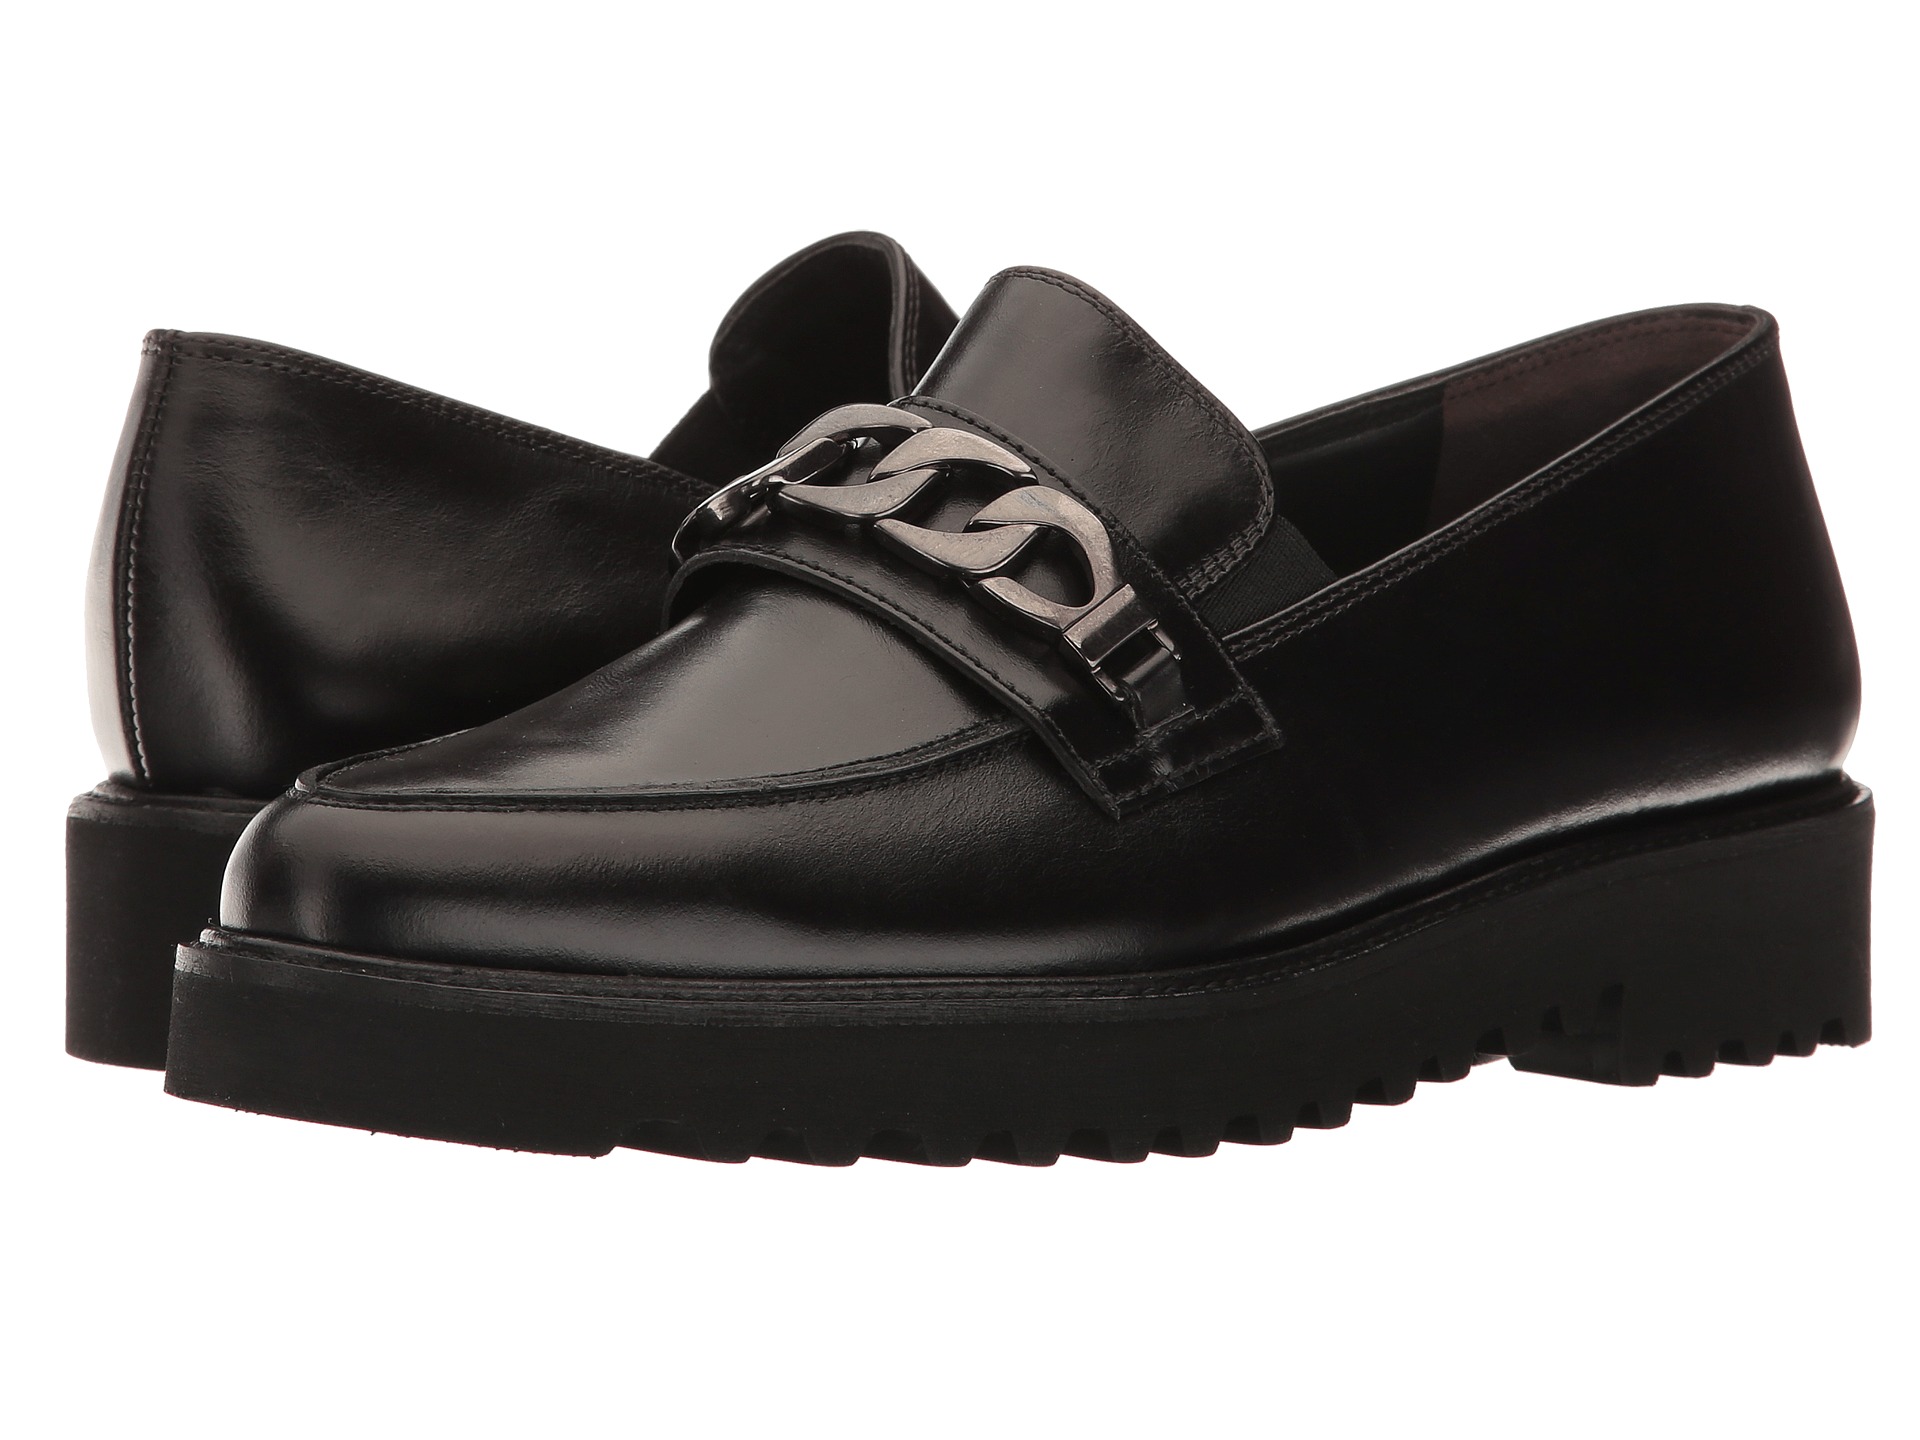 Paul Green Maria Loafer Black Leather - Zappos.com Free Shipping BOTH Ways1920 x 1440